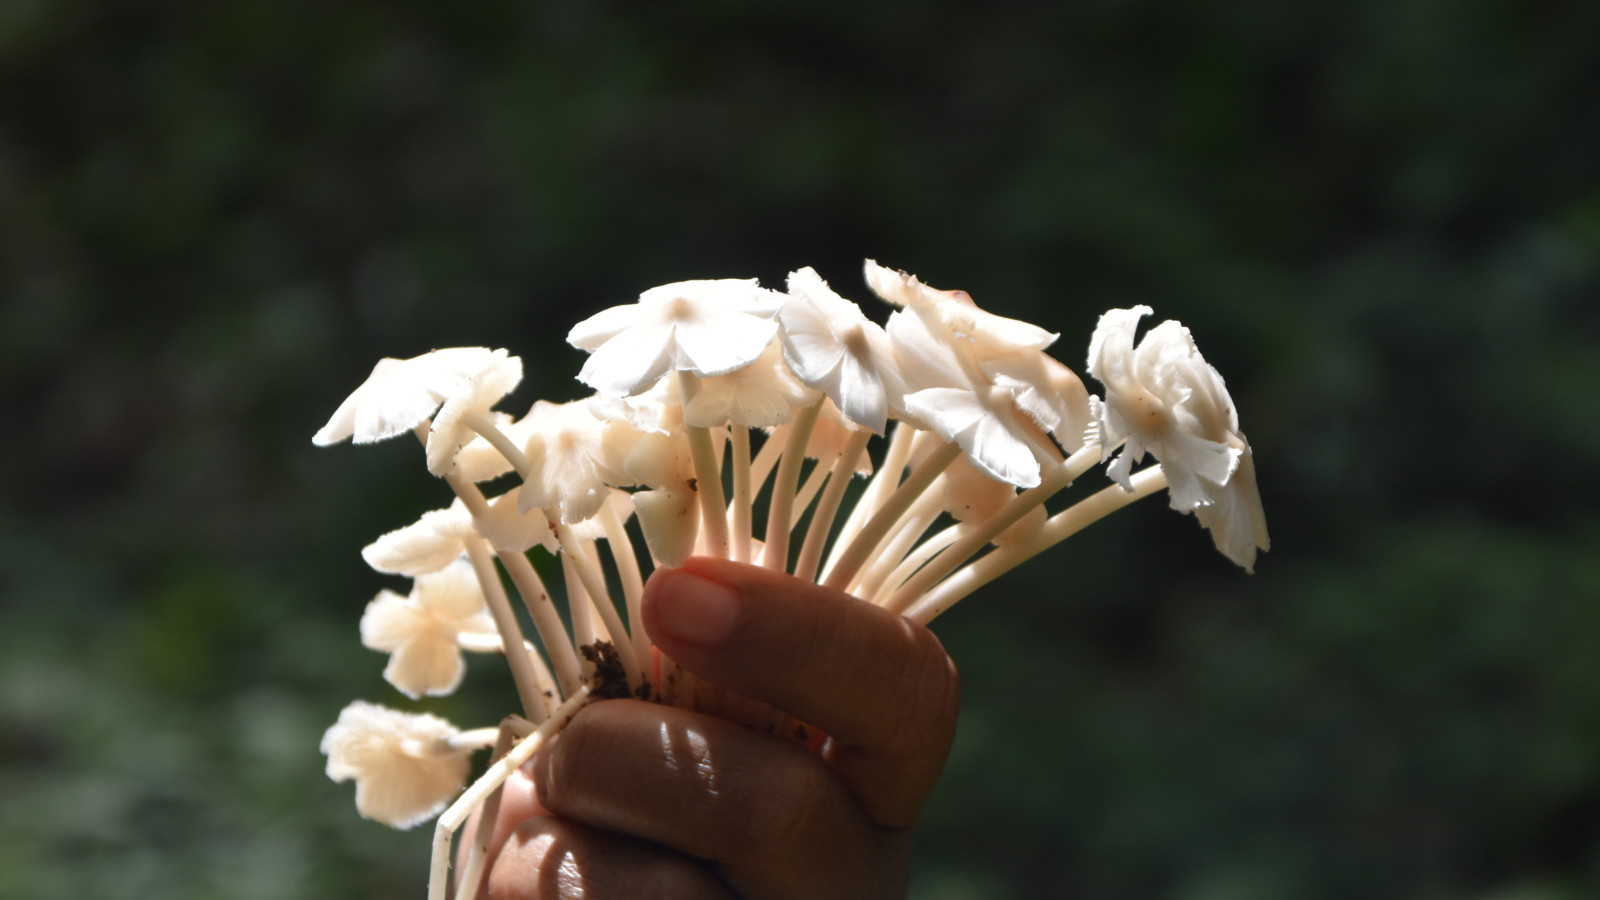 A close up of a hand holding a bunch of small mushrooms as though it was a bouquet of flowers